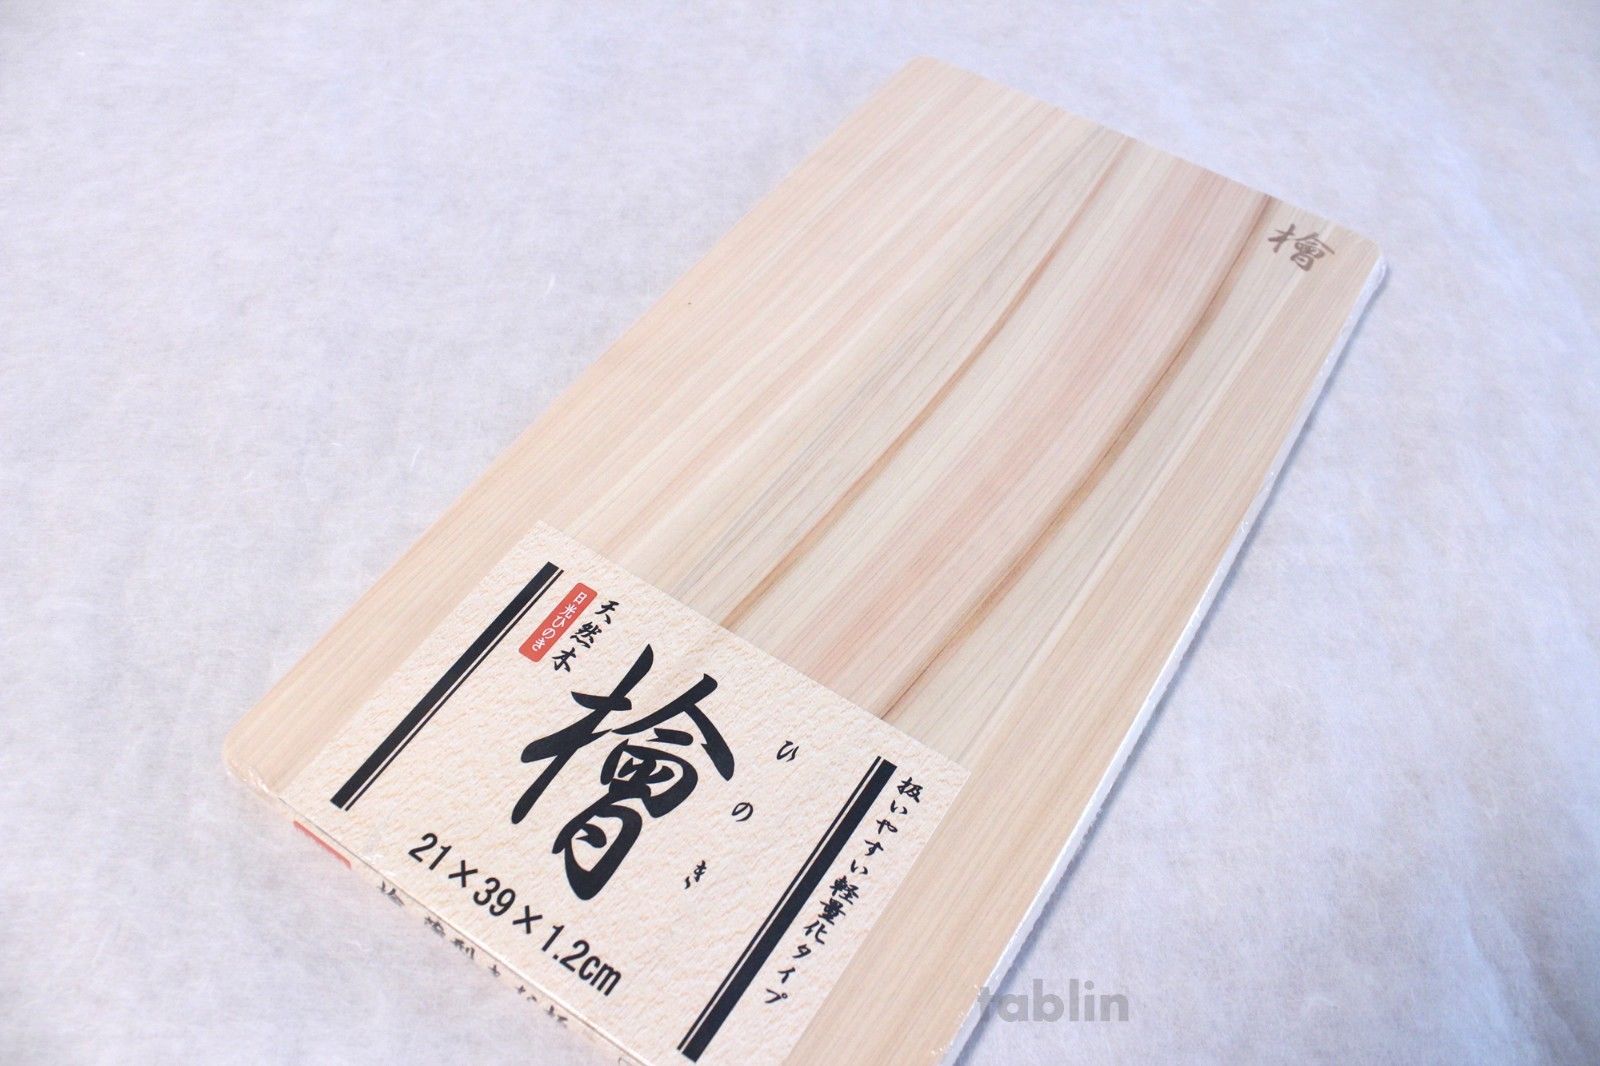 Japanese natural wood Professional Cutting Board made from